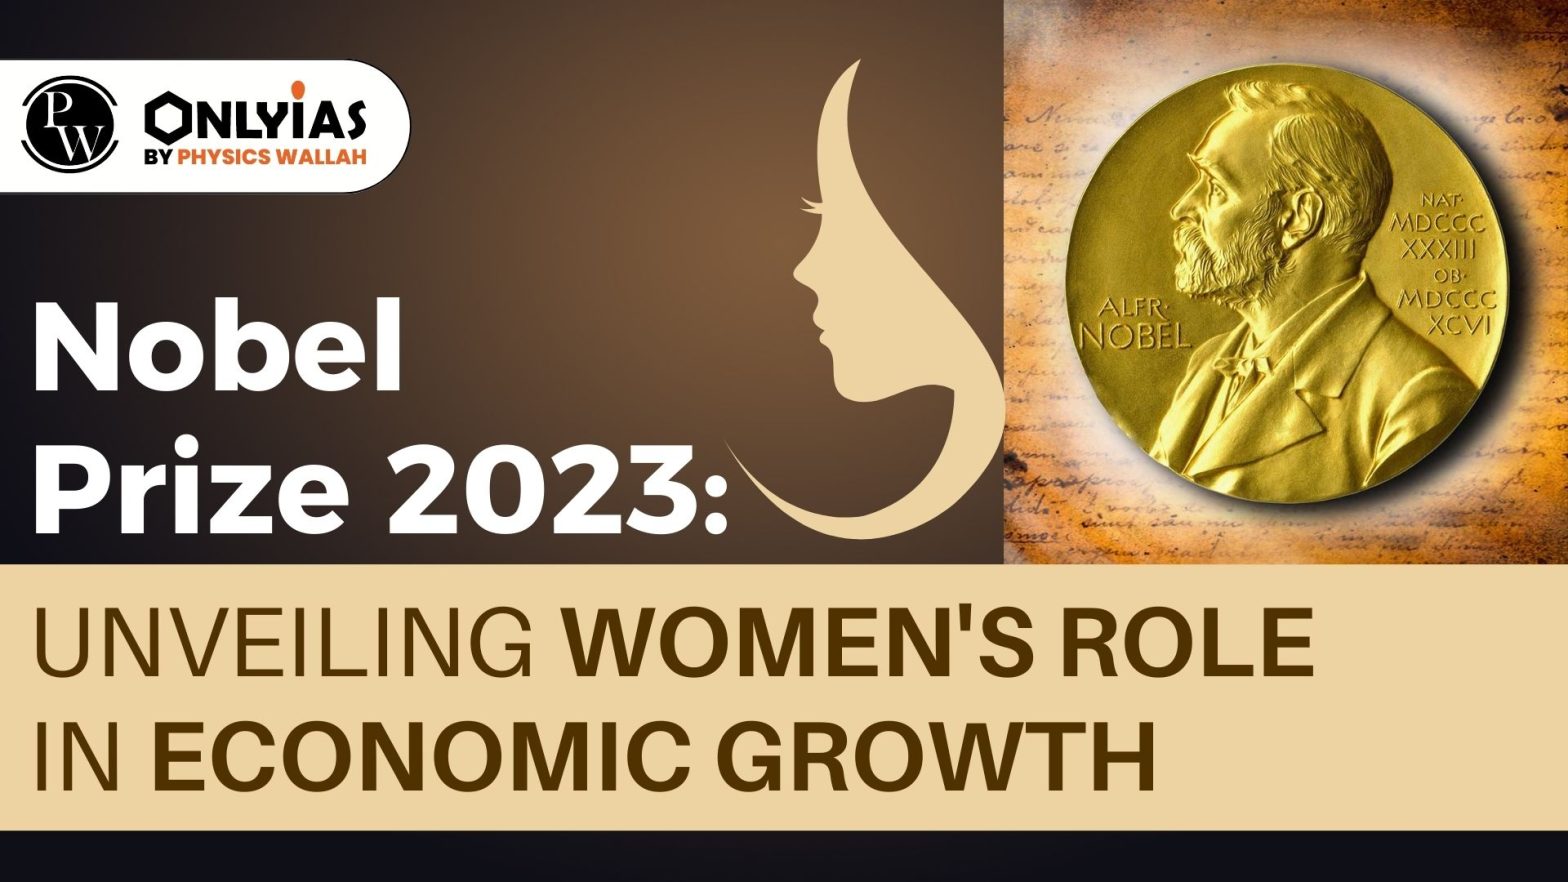 Nobel Prize 2023: Unveiling Women’s Role in Economic Growth